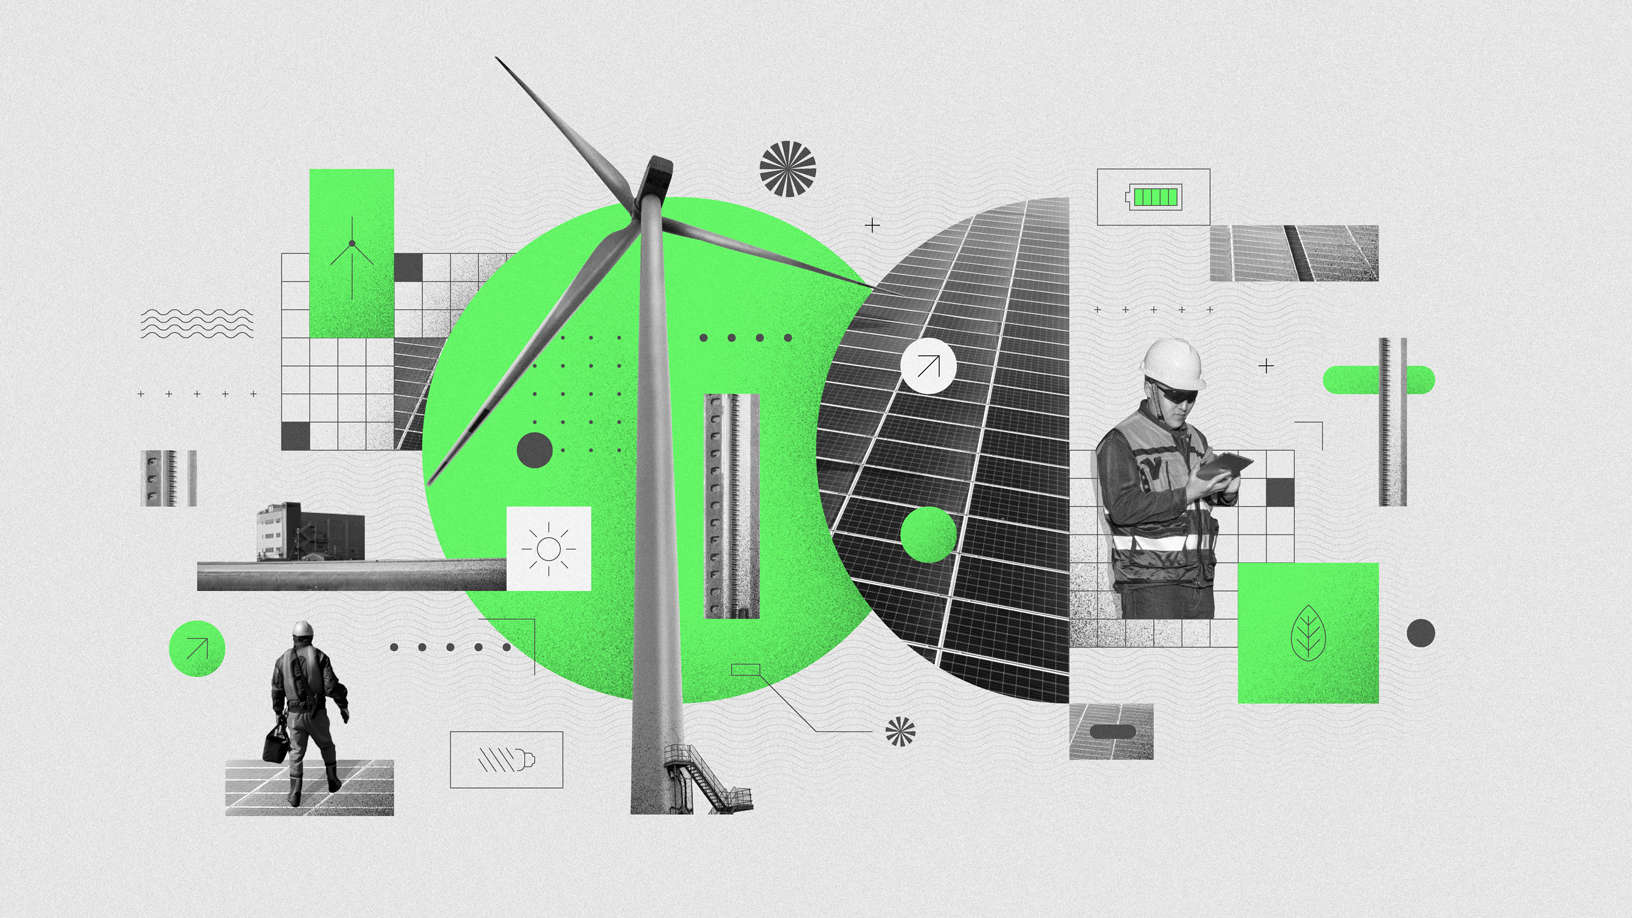 Apple suppliers clean energy illustration